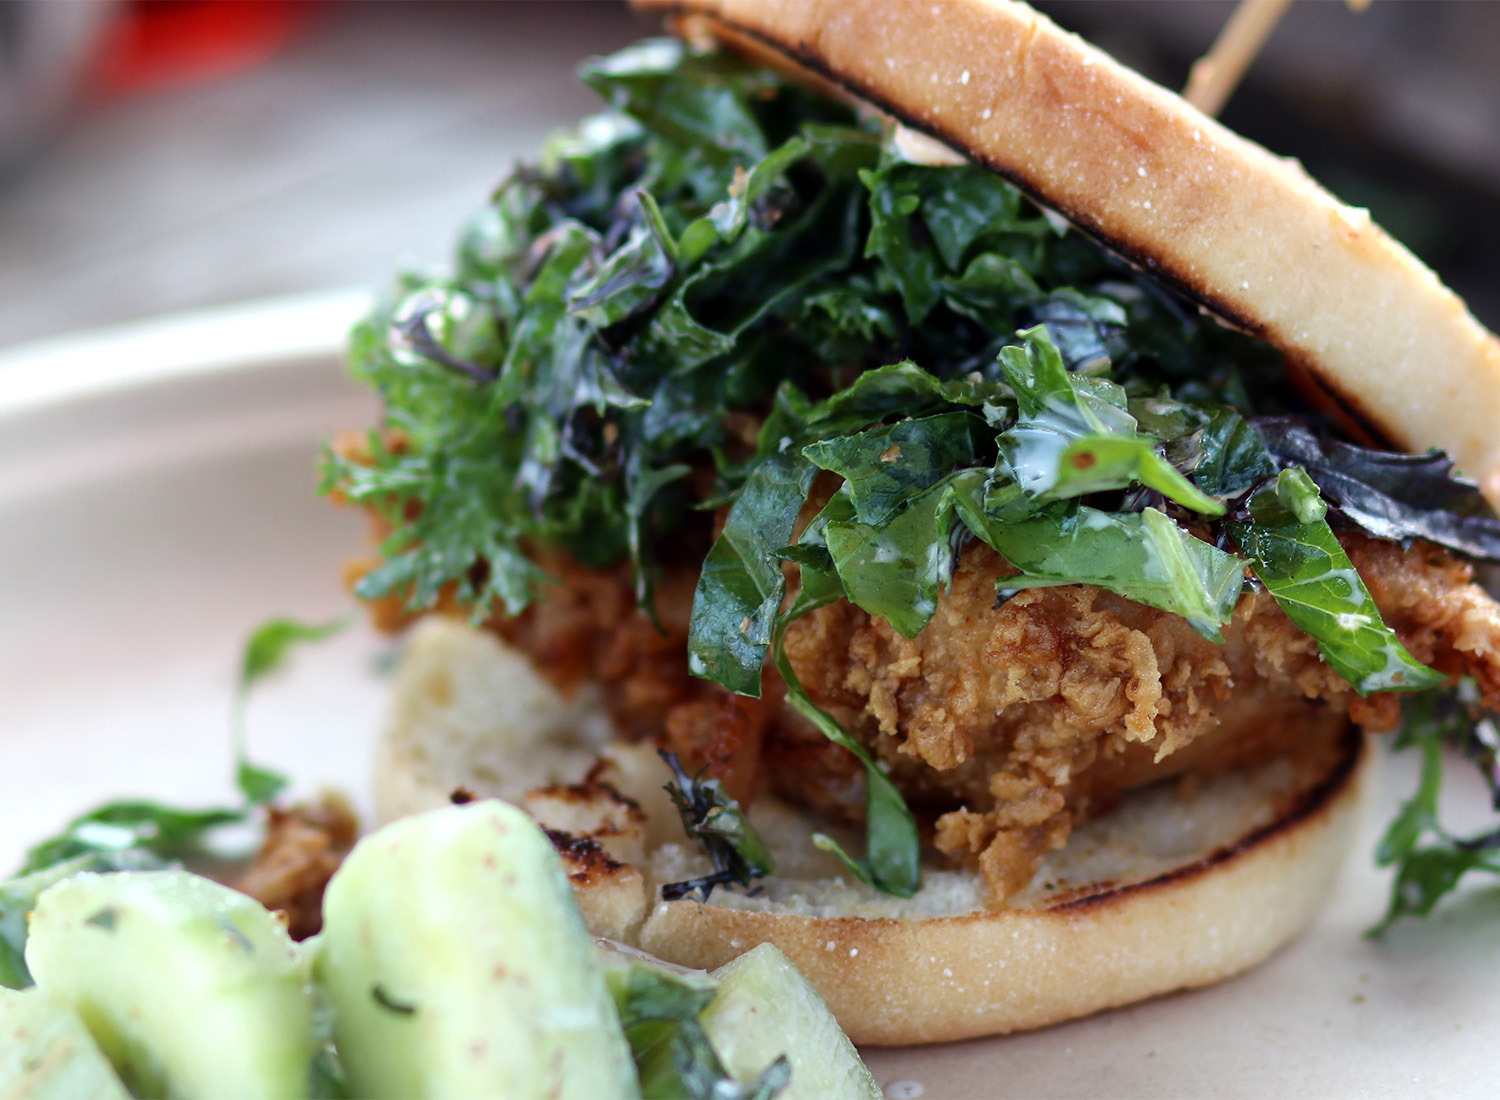 The Bodega, a buttermilk fried chicken sandwich with cucumber salad at The Bodega food truck at The Block in Petaluma. 6/17. Heather Irwin/PD